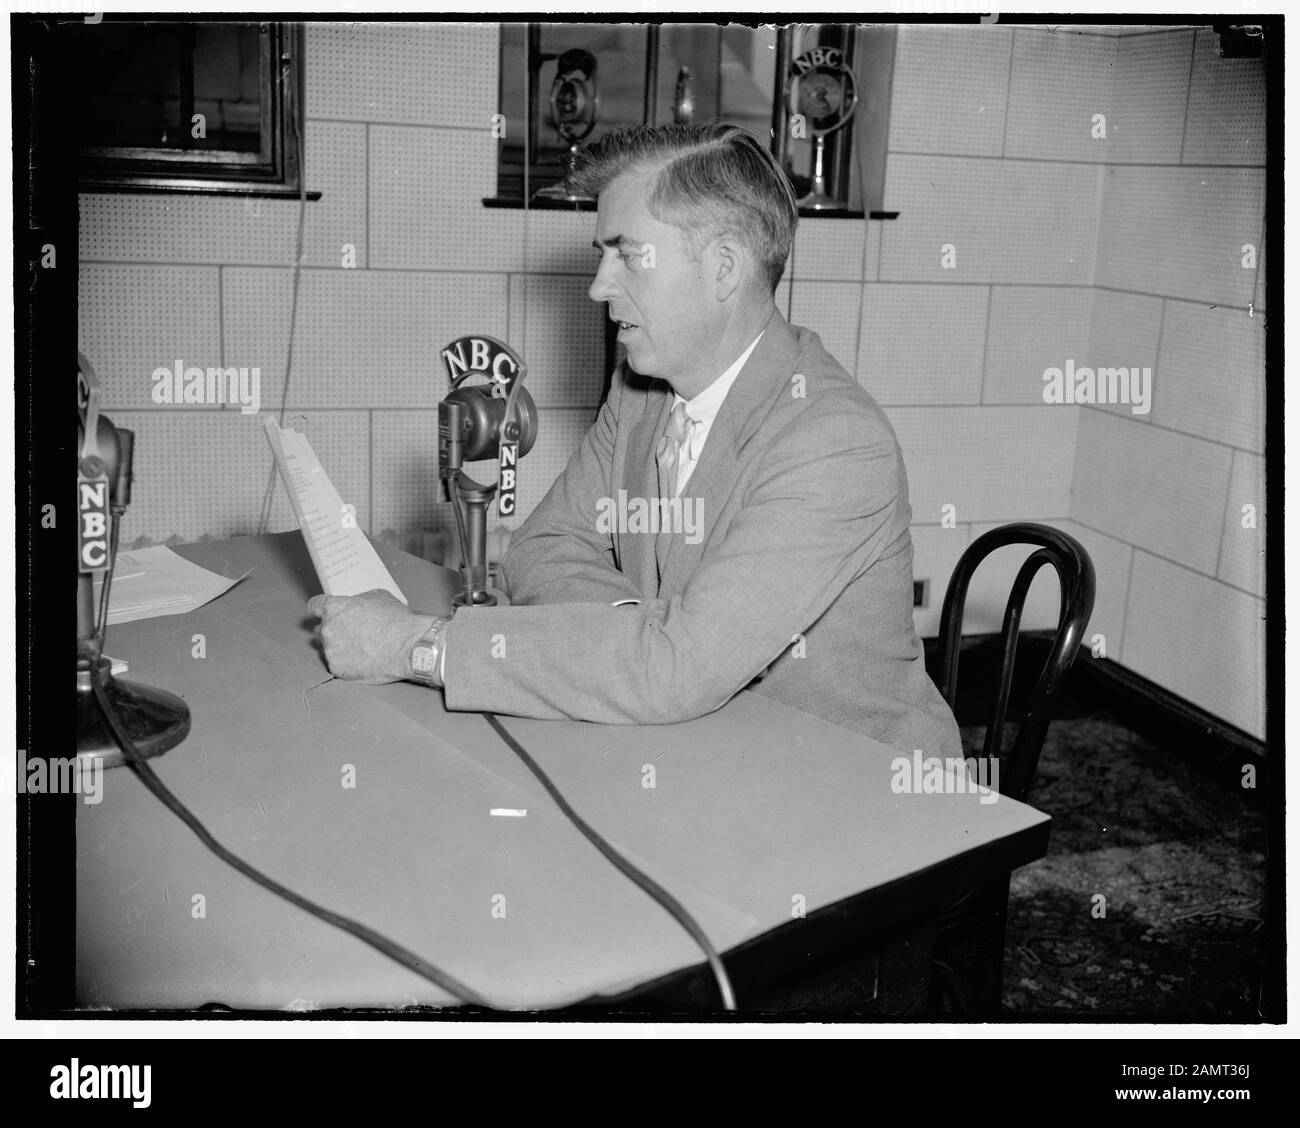 3,000 hours on the air waves. Washington, D.C., June 27. Sec. of Agriculture Henry Wallace, speaking over the Farm and Home Hour today, todays broadcast marks the 3,000th hour on the air and makes it the world oldest radio program from the standpoint of hours on the air, 6/27/38 Abstract/medium: 1 negativeÂ : glassÂ ; 4 x 5 in. or smaller; 1938;  Catalog: https://..gov/2016873755 Image download: https://cdn..gov/master/pnp/hec/24700/24784a.tif Original url: https://www..gov/pictures/item/2016873755/; Harris & Ewing, photographer; Stock Photo